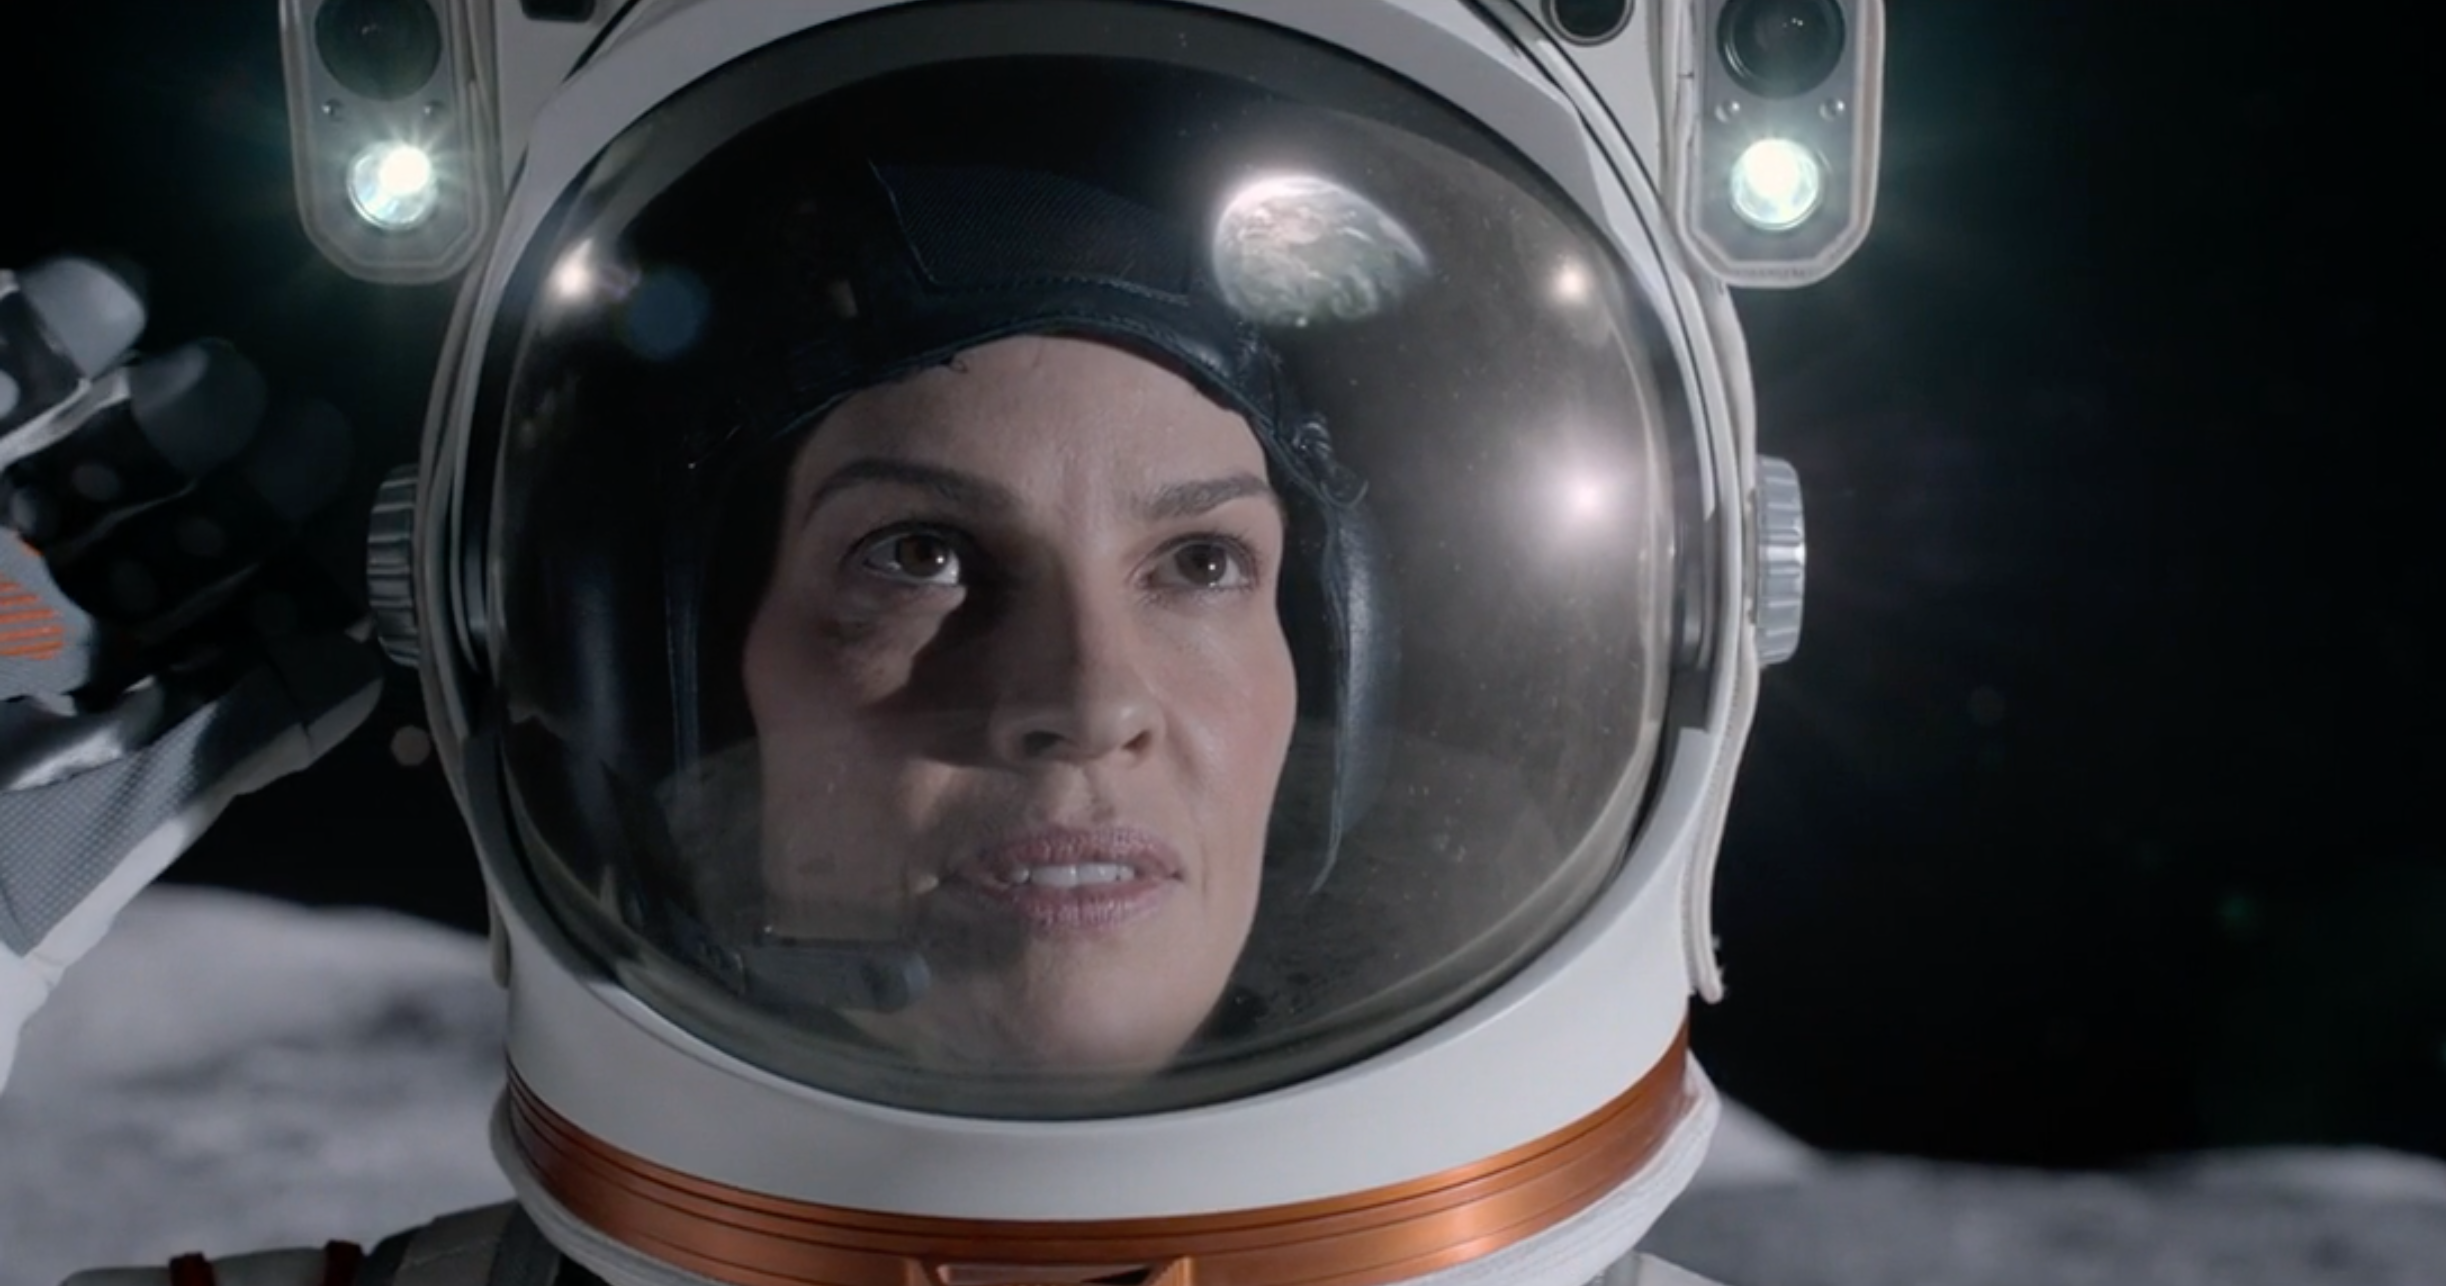 Hilary Swank in a space suit.